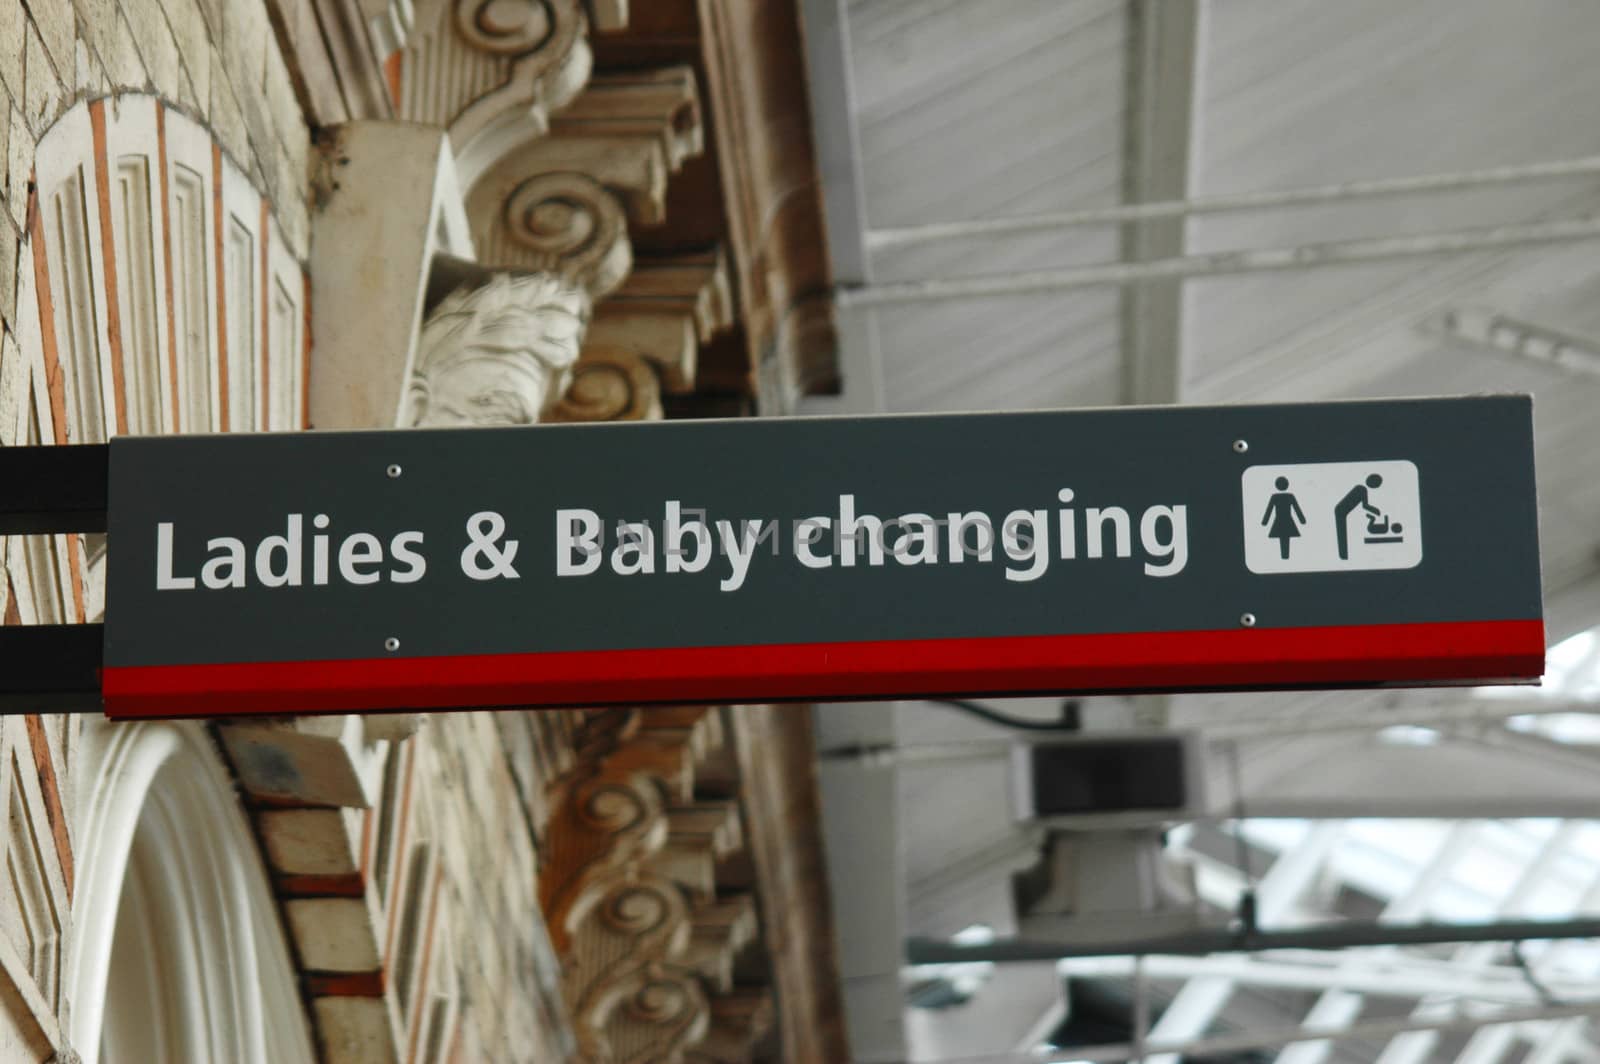 Ladies & baby changing sign at the station